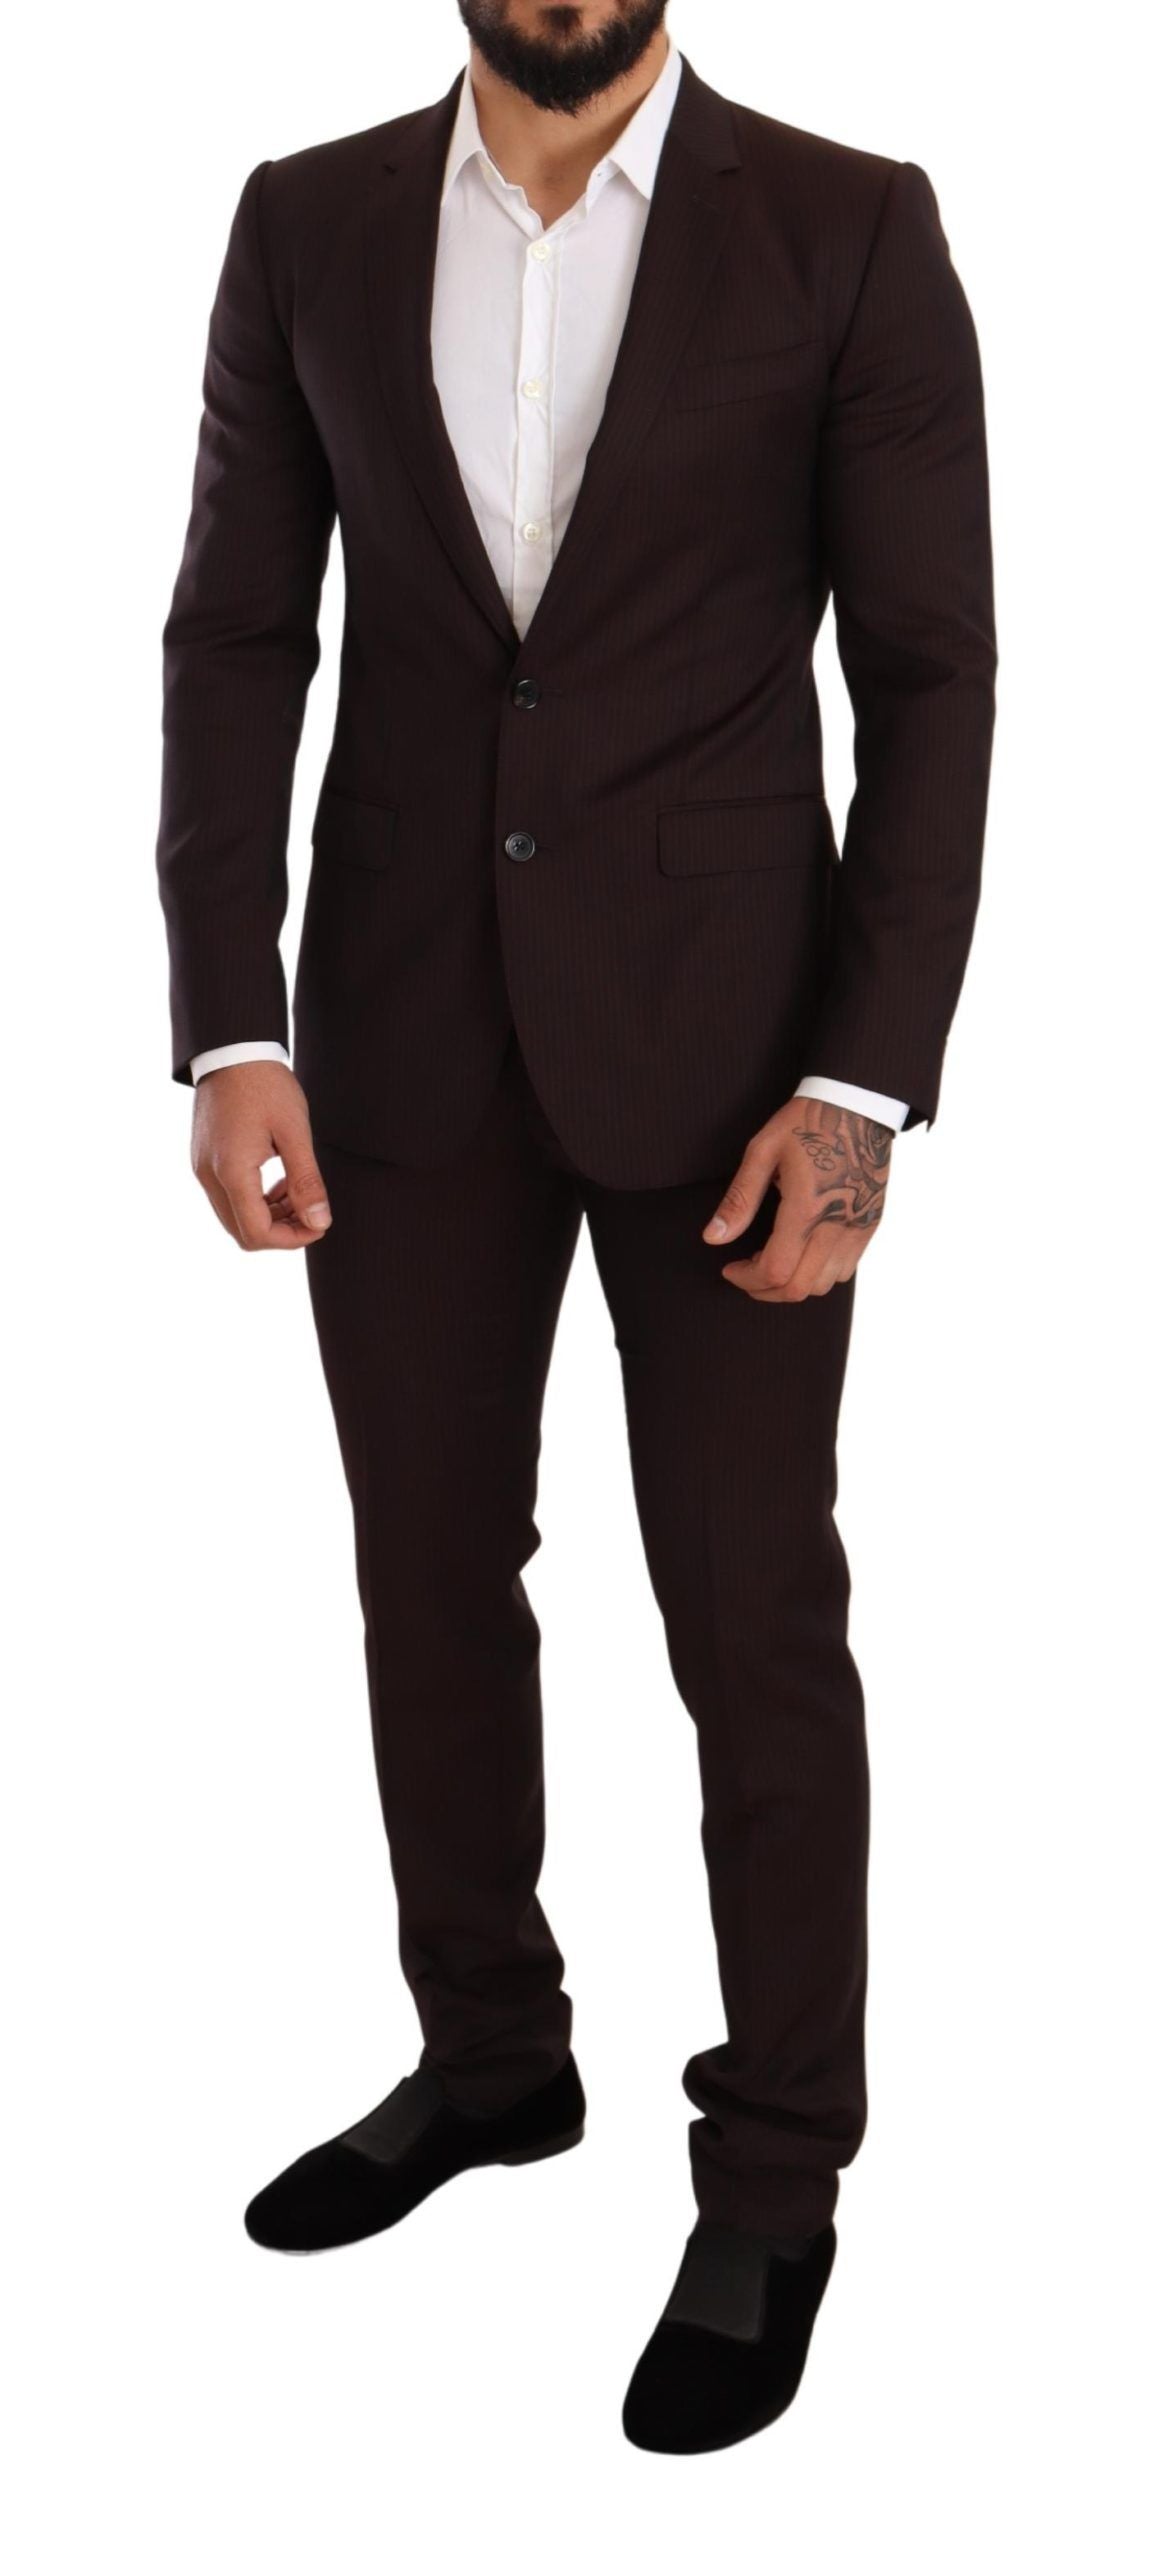 Dolce & Gabbana Men's Bordeaux Wool MARTINI Slim Fit Suit - Designed by Dolce & Gabbana Available to Buy at a Discounted Price on Moon Behind The Hill Online Designer Discount Store